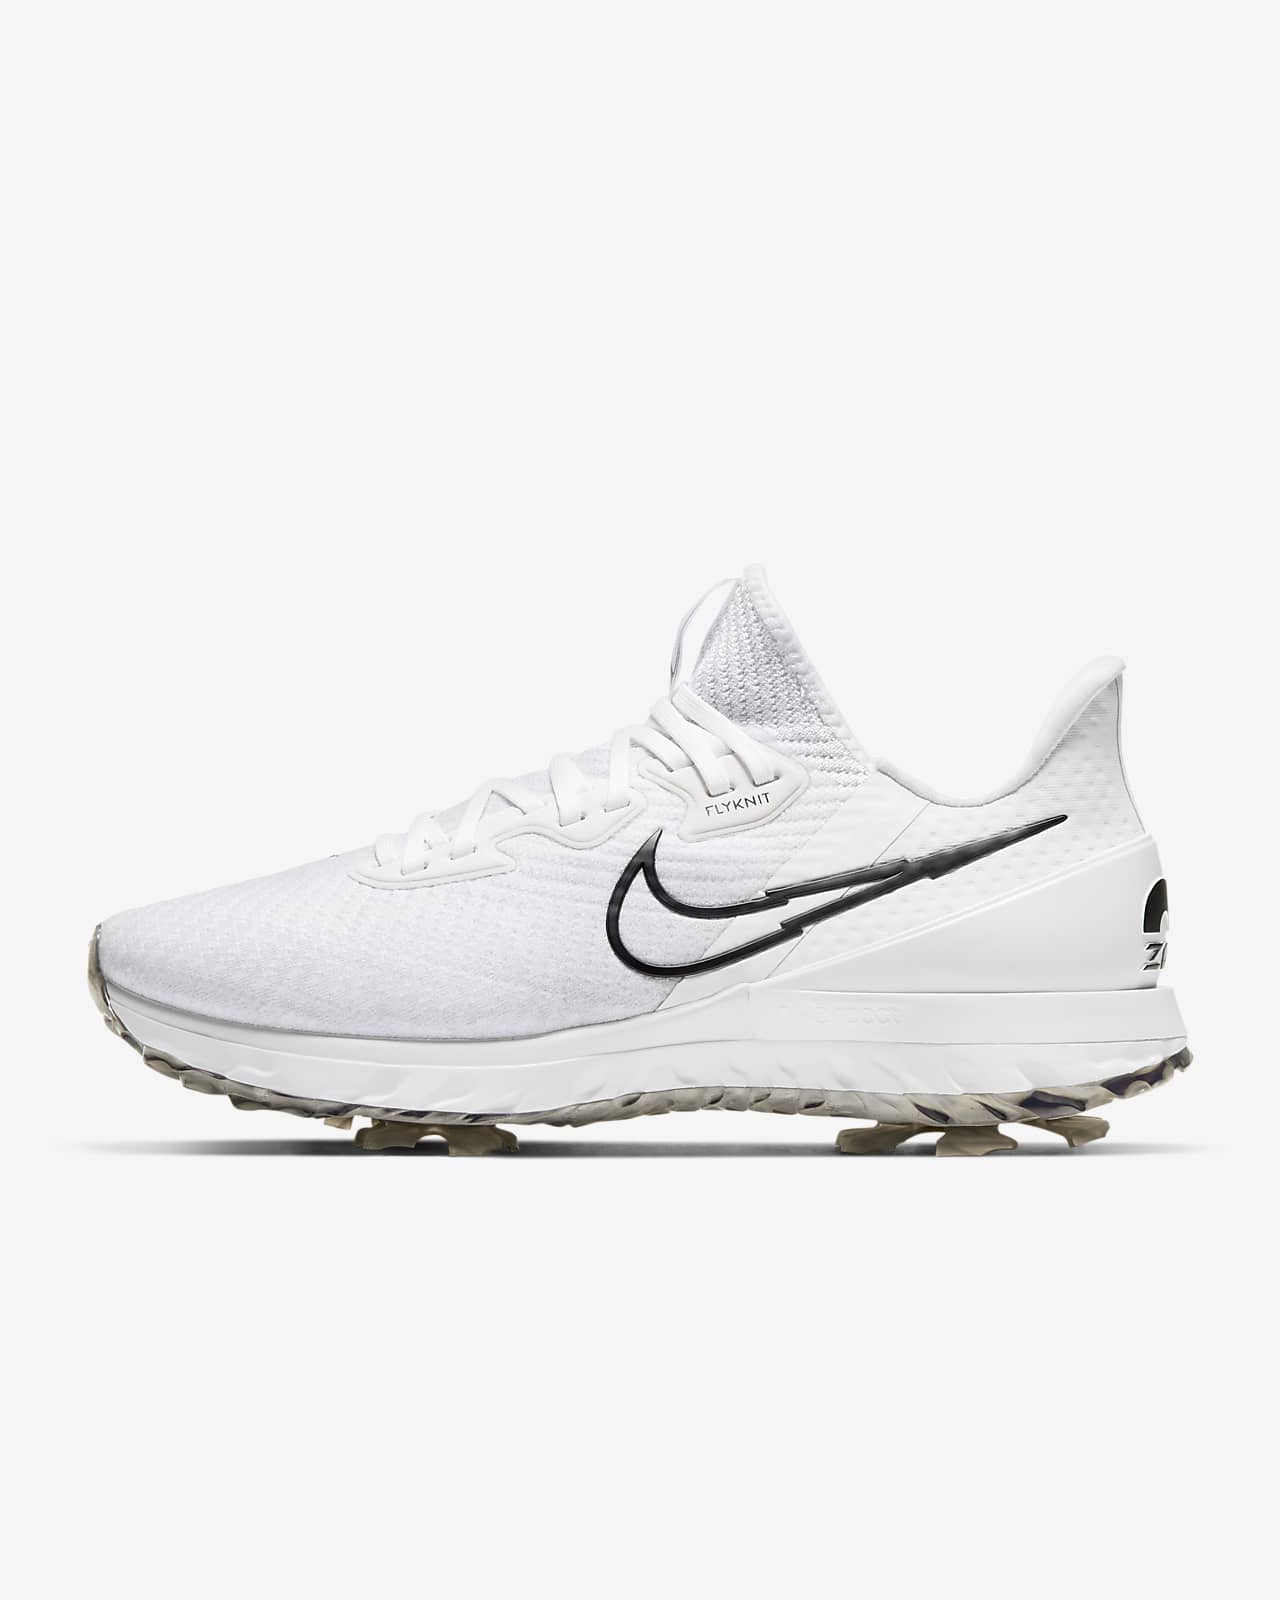 Anormal herir clon Nike Air Zoom Golf Shoes Top Sellers, SAVE 59%.